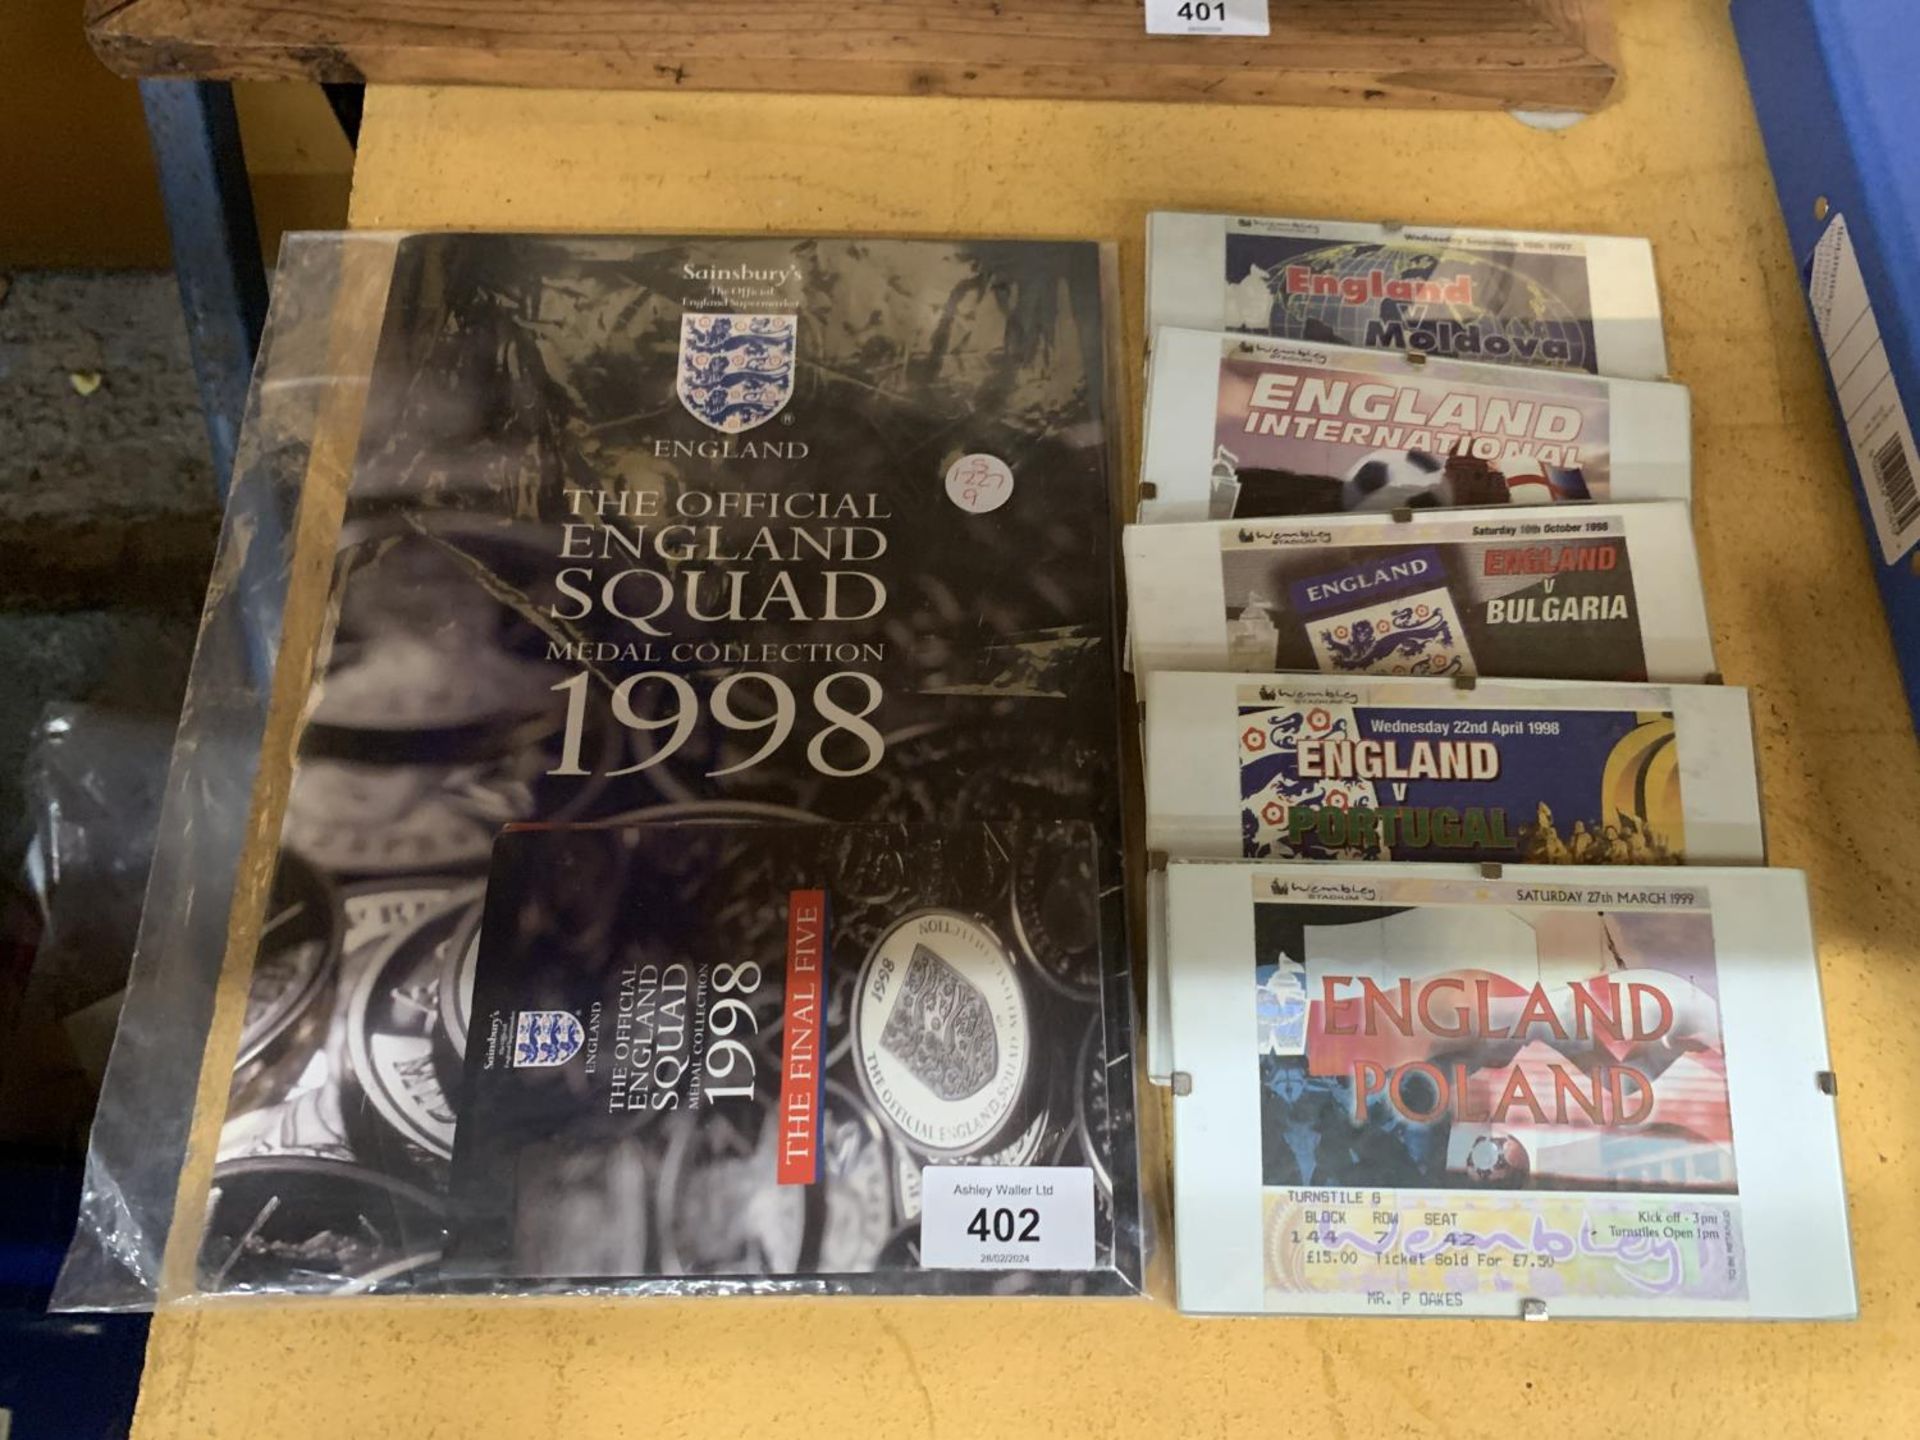 FIVE FRAMED ENGLAND INTERNATIONAL MATCHDAY TICKETS FROM THE 1990'S, PLUS A COMPLETE OFFICIAL COIN